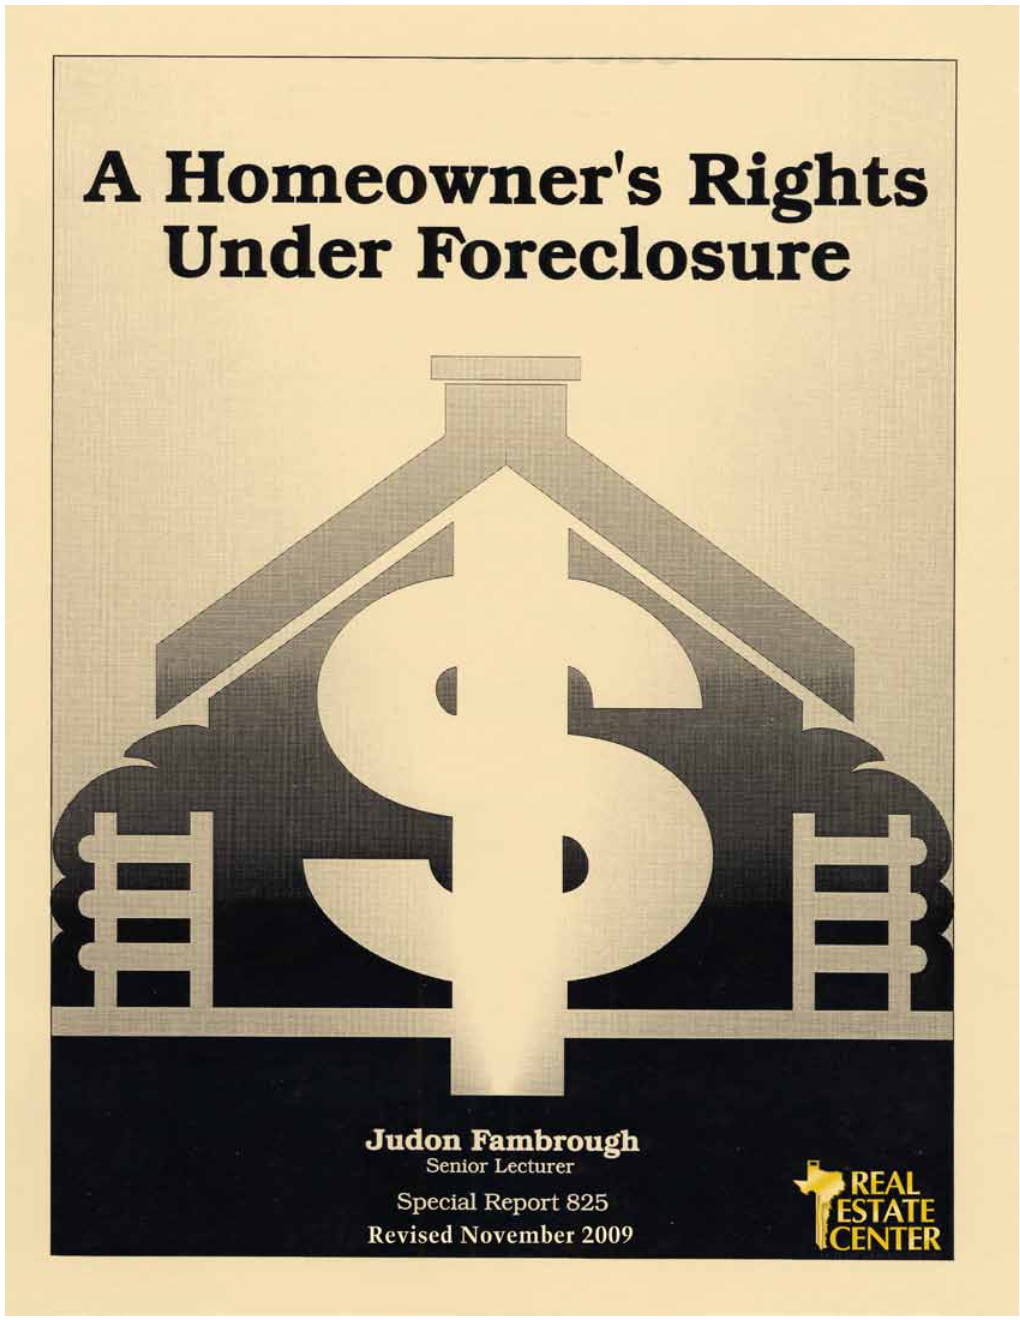 A Homeowner's Rights Under Foreclosure